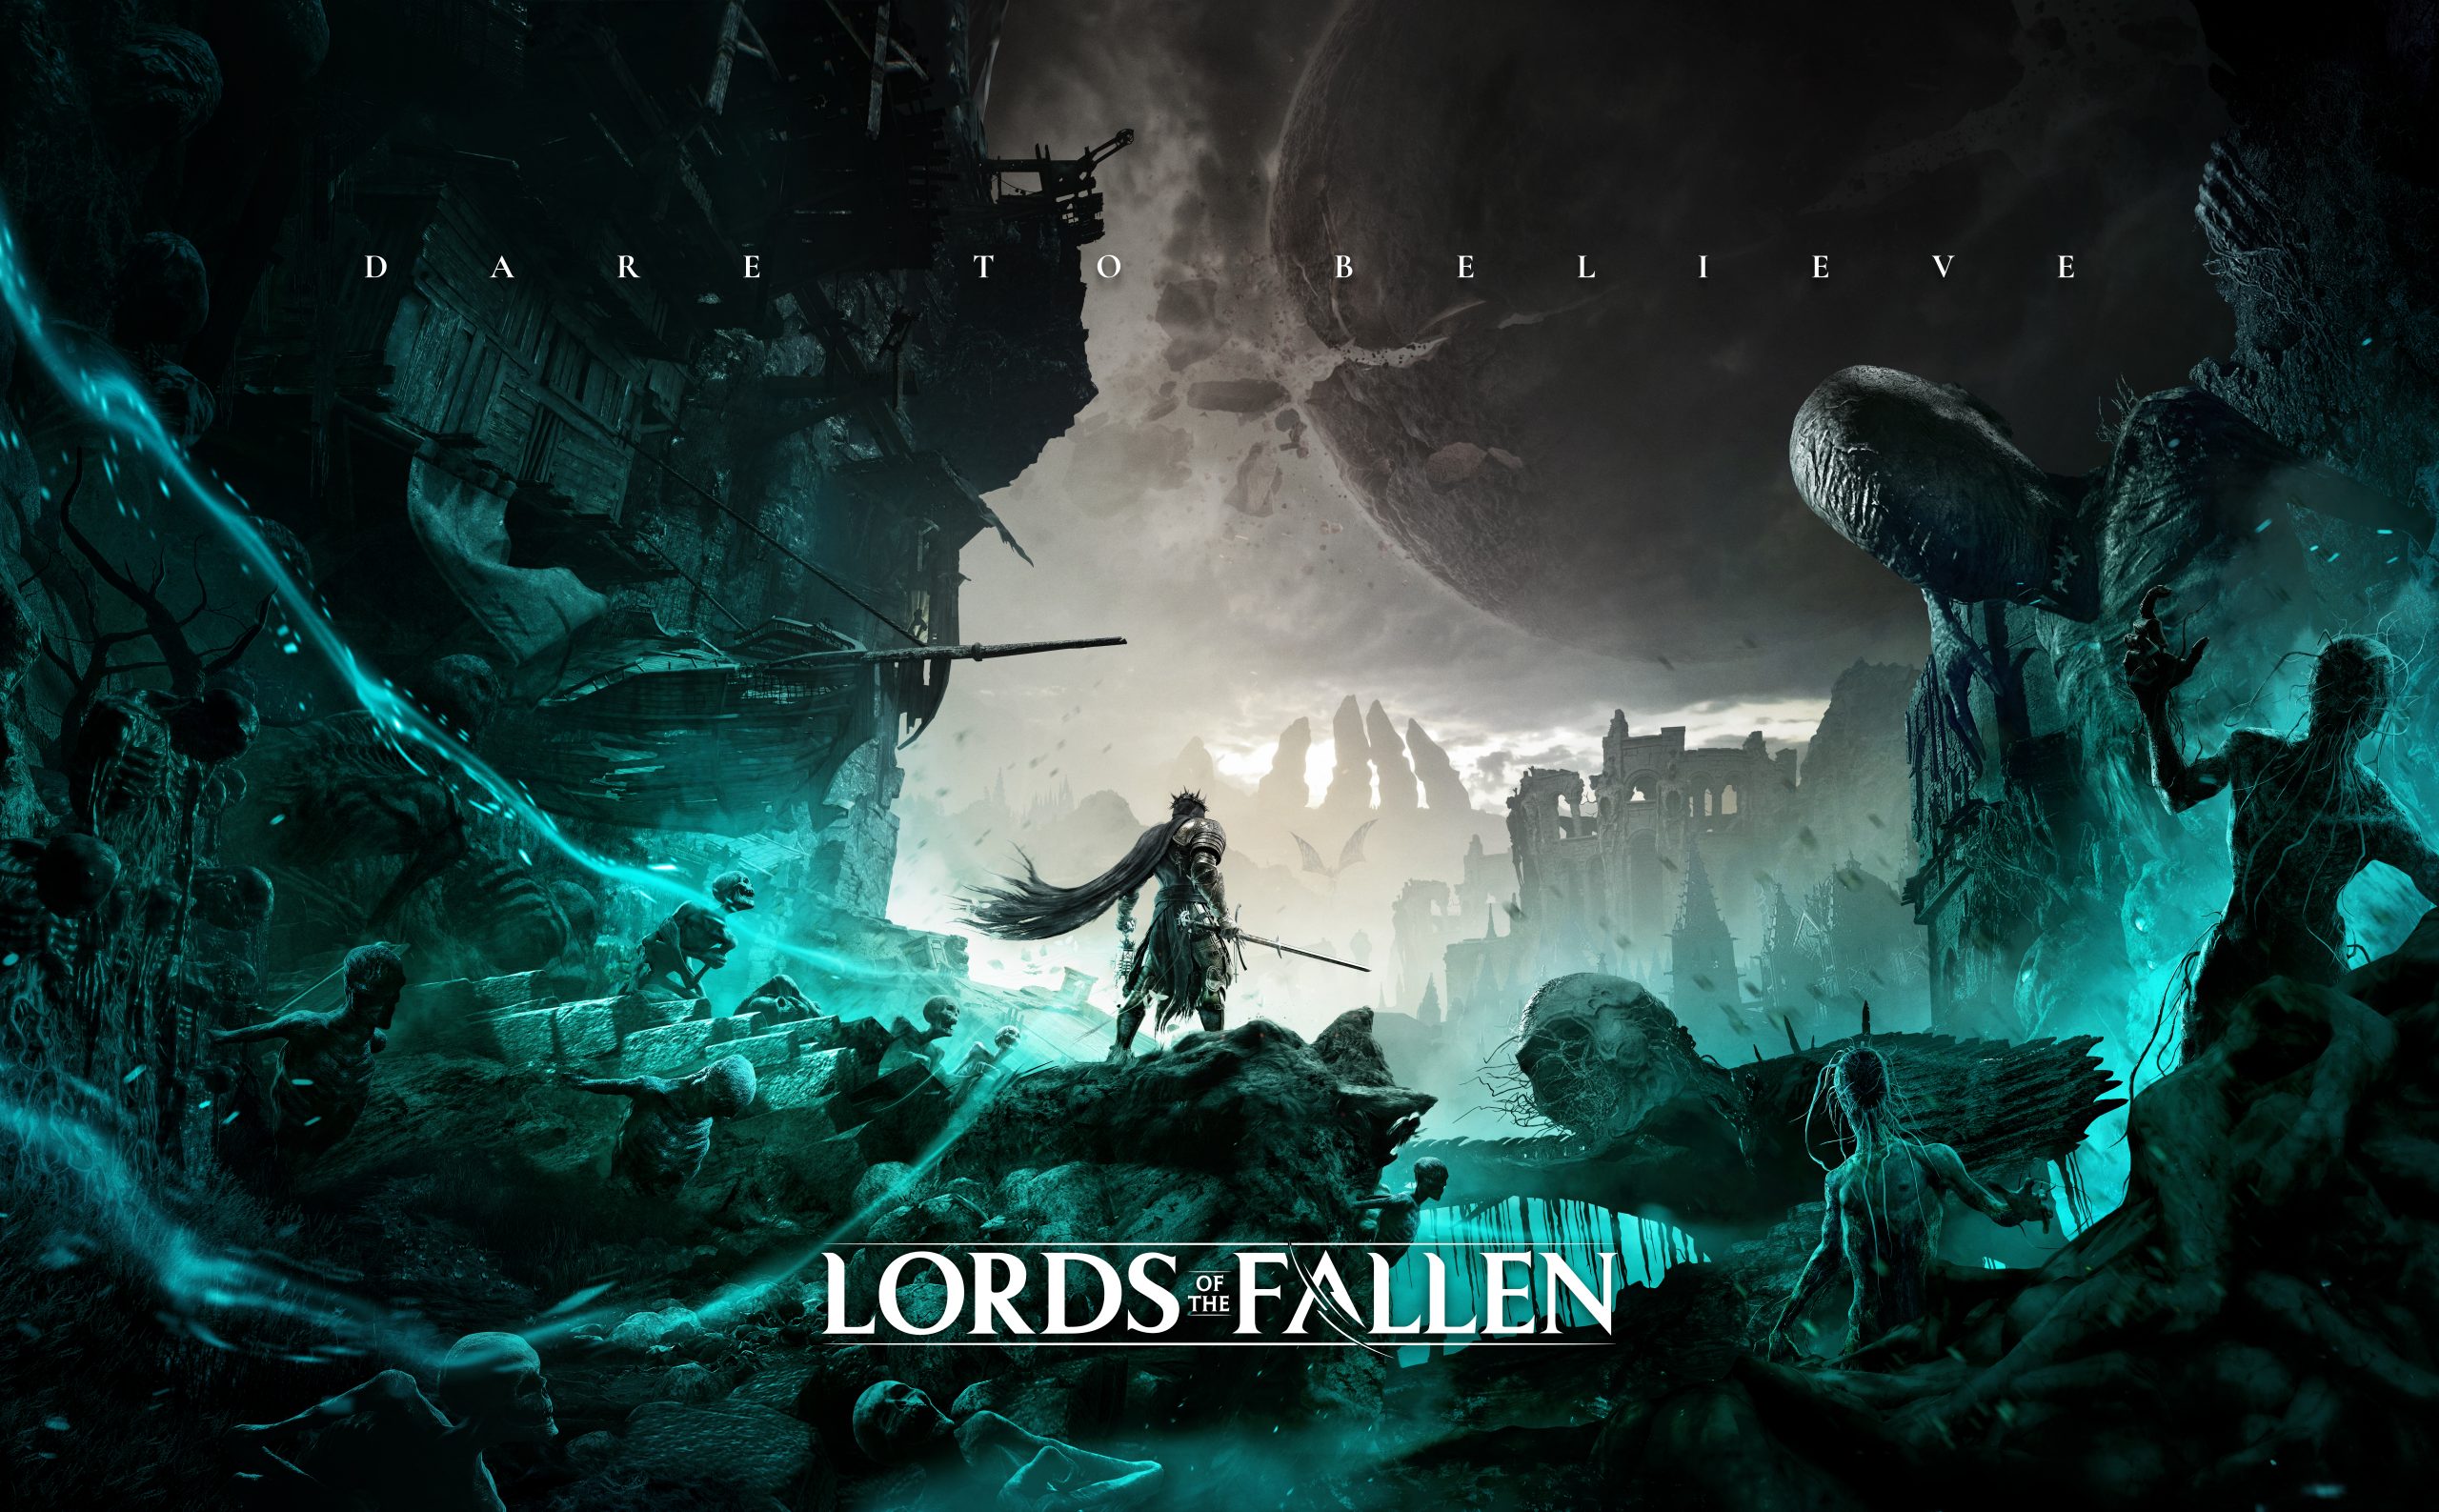 New Lords of the Fallen Update Implements Overhauled Bosses, Improved Lock-On, Balance Changes & More